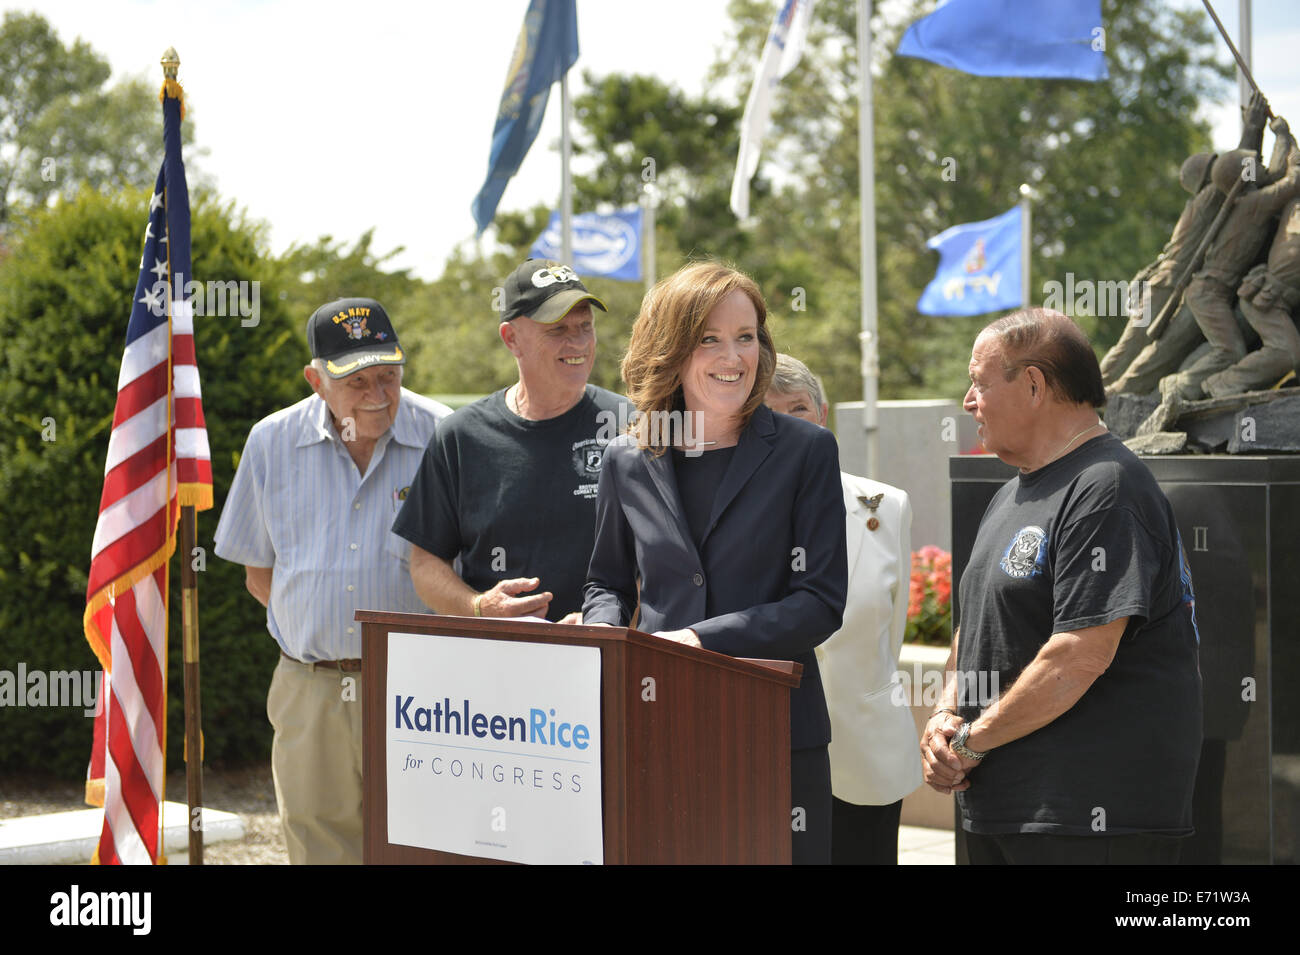 East Meadow, New York, USA. 3rd Sep, 2014. KATHLEEN RICE, at podium, Democratic congressional candidate (NY-04), releases a whitepaper on veterans policy and announces formation of her campaign's Veterans Advisory Committee, at Veterans Memorial at Eisenhower Park, after touring Northport VA Medical Center with outgoing Rep. CAROLYN MCCARTHY (behind Rice, in white jacket). Congresswoman McCarthy and several committee members joined Rice at the press conference, including: PAUL ZYDOR, (in blue shirt) of Merrick, U.S. Navy, Korean War Veteran; PAT YNGSTROM, (in black T-shirt and cap) of Merric Stock Photo